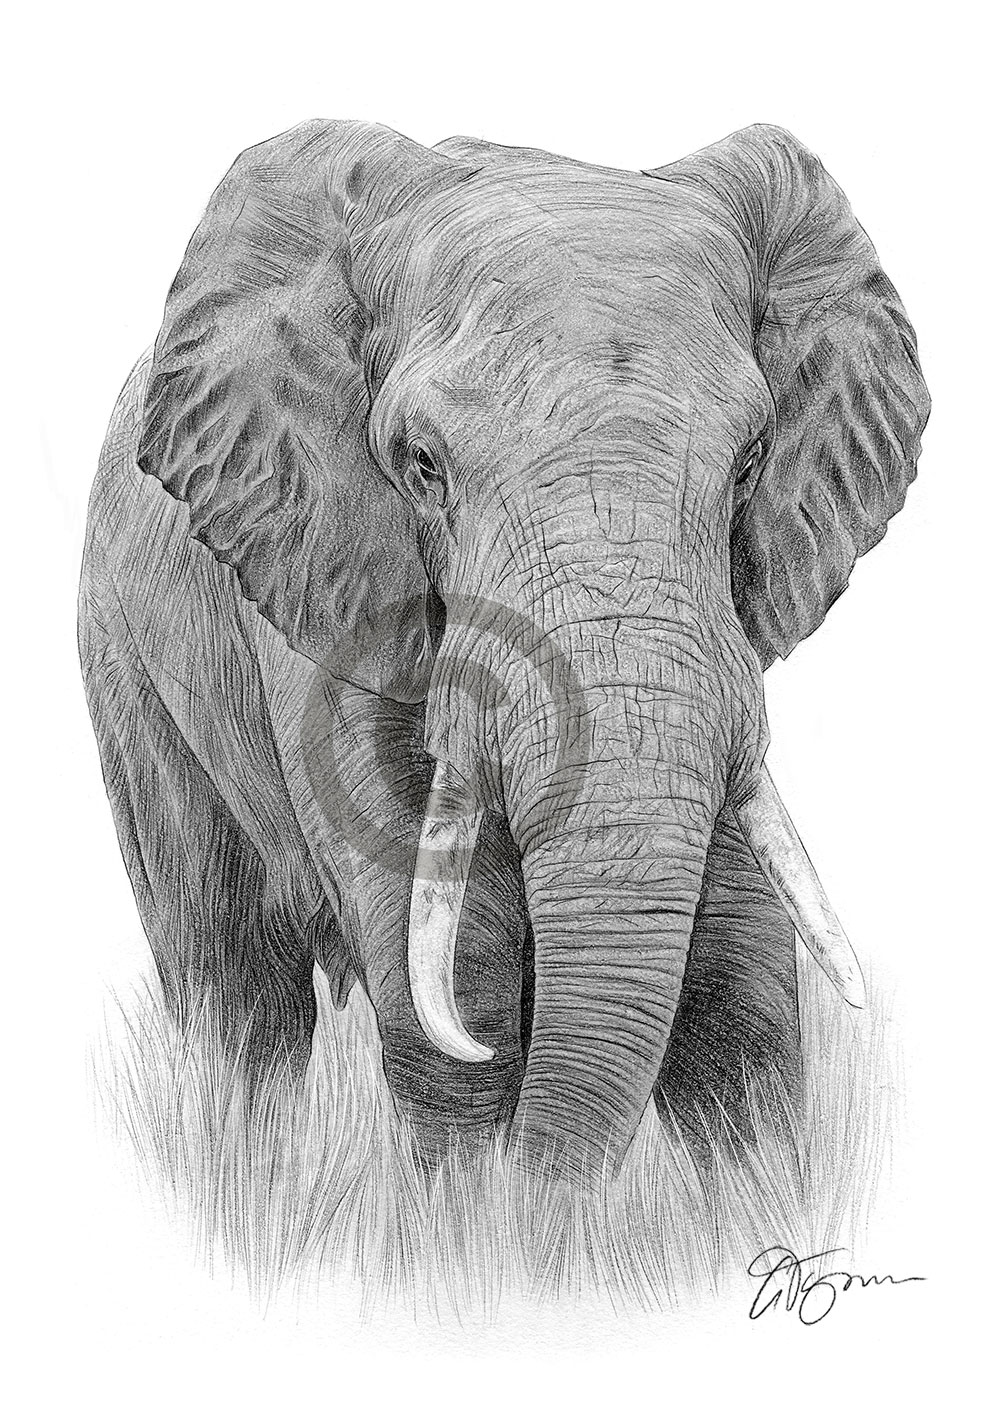 Pencil drawing of an elephant by artist Gary Tymon